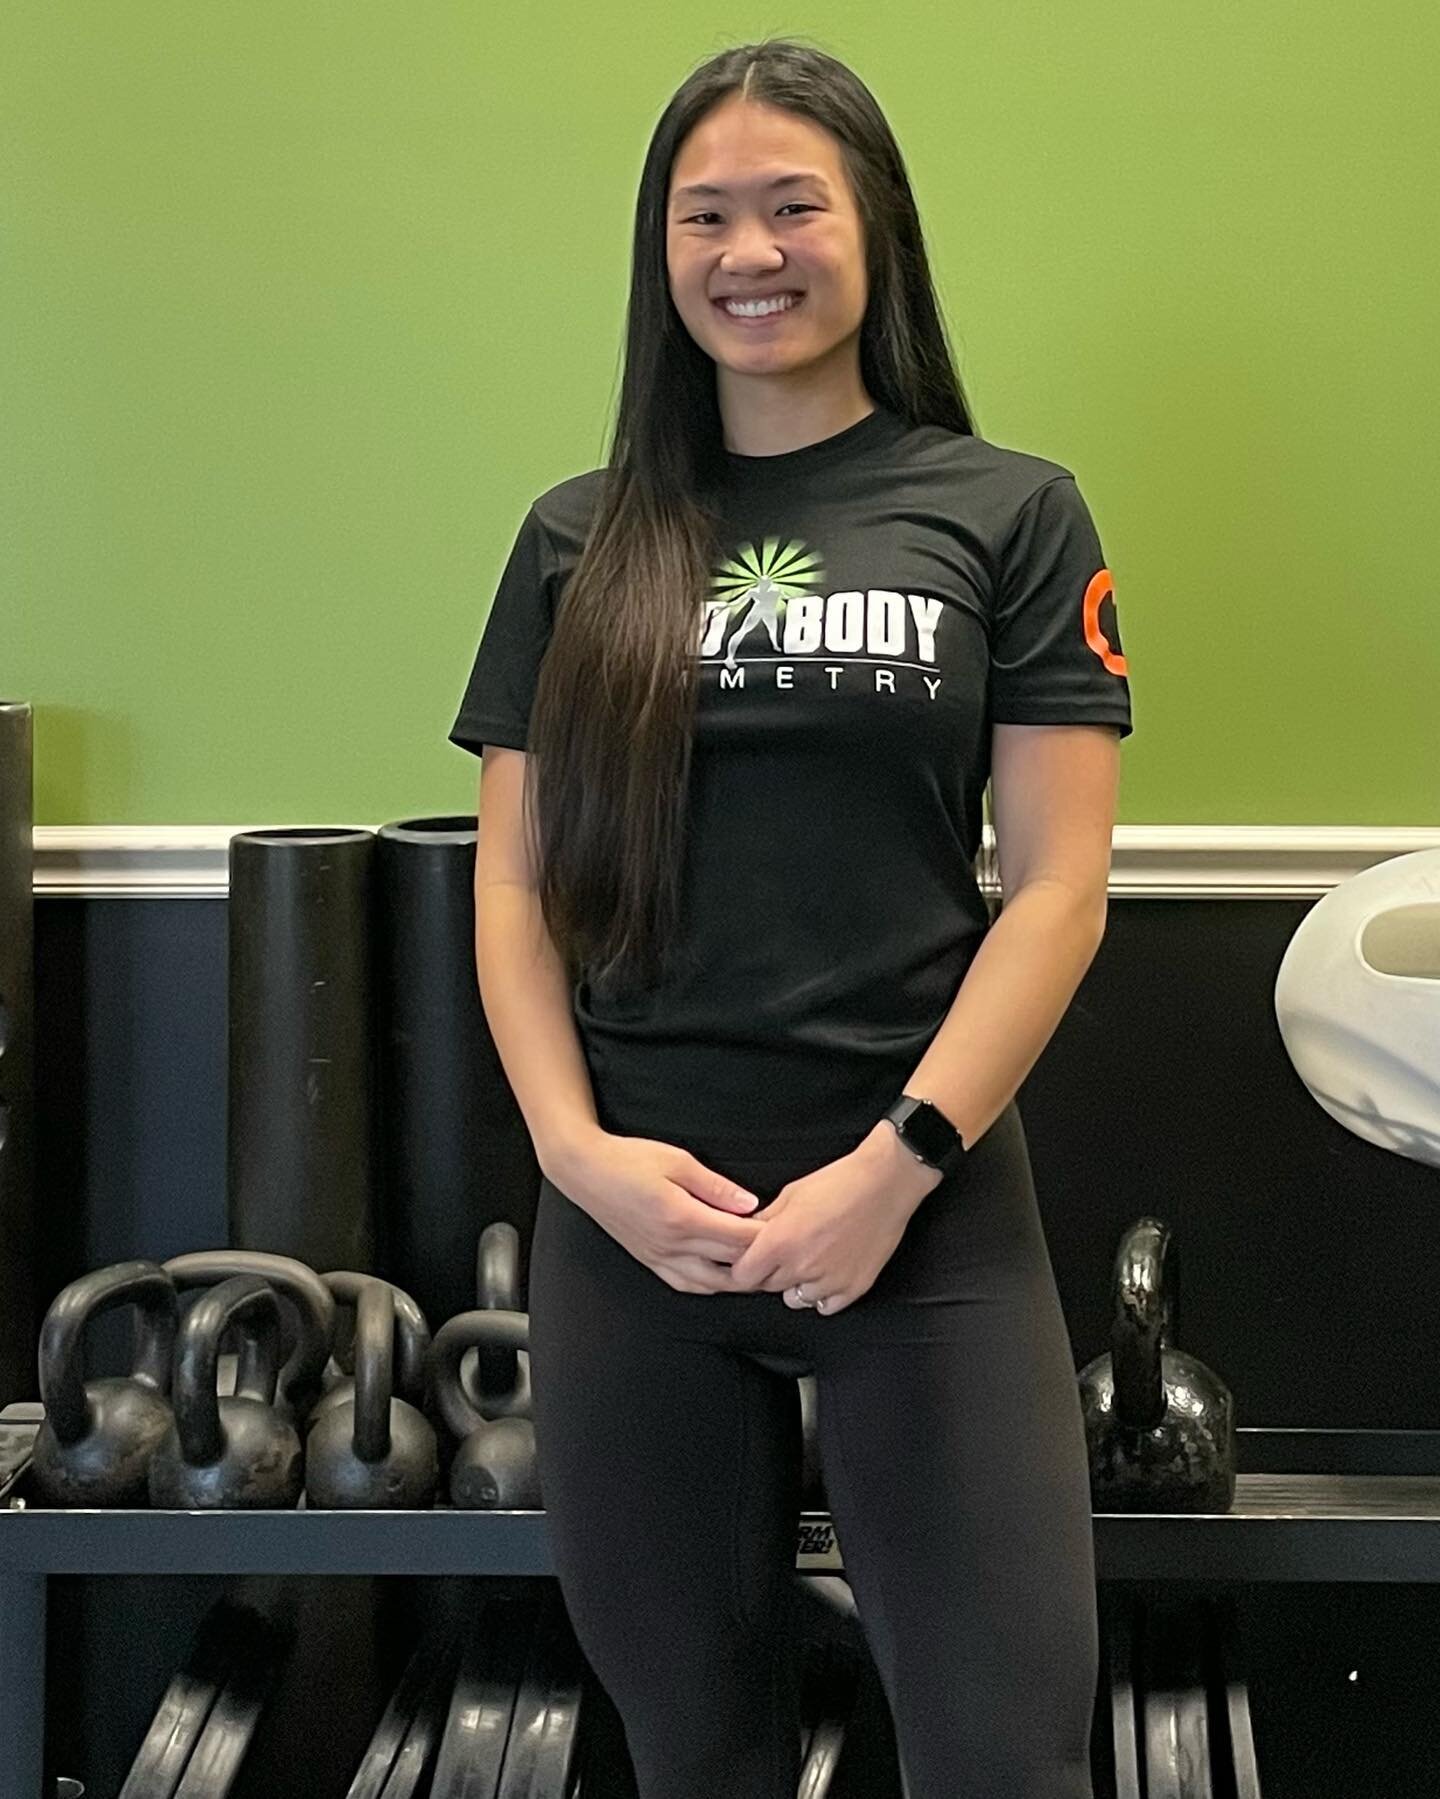 Please welcome new personal trainer Marissa McNamara to our Fit Fam! 
Marissa is a Michigan State University graduated that has a passion for people and fitness. She specializes in coaching people on how to live sustainable lifestyles and reach their